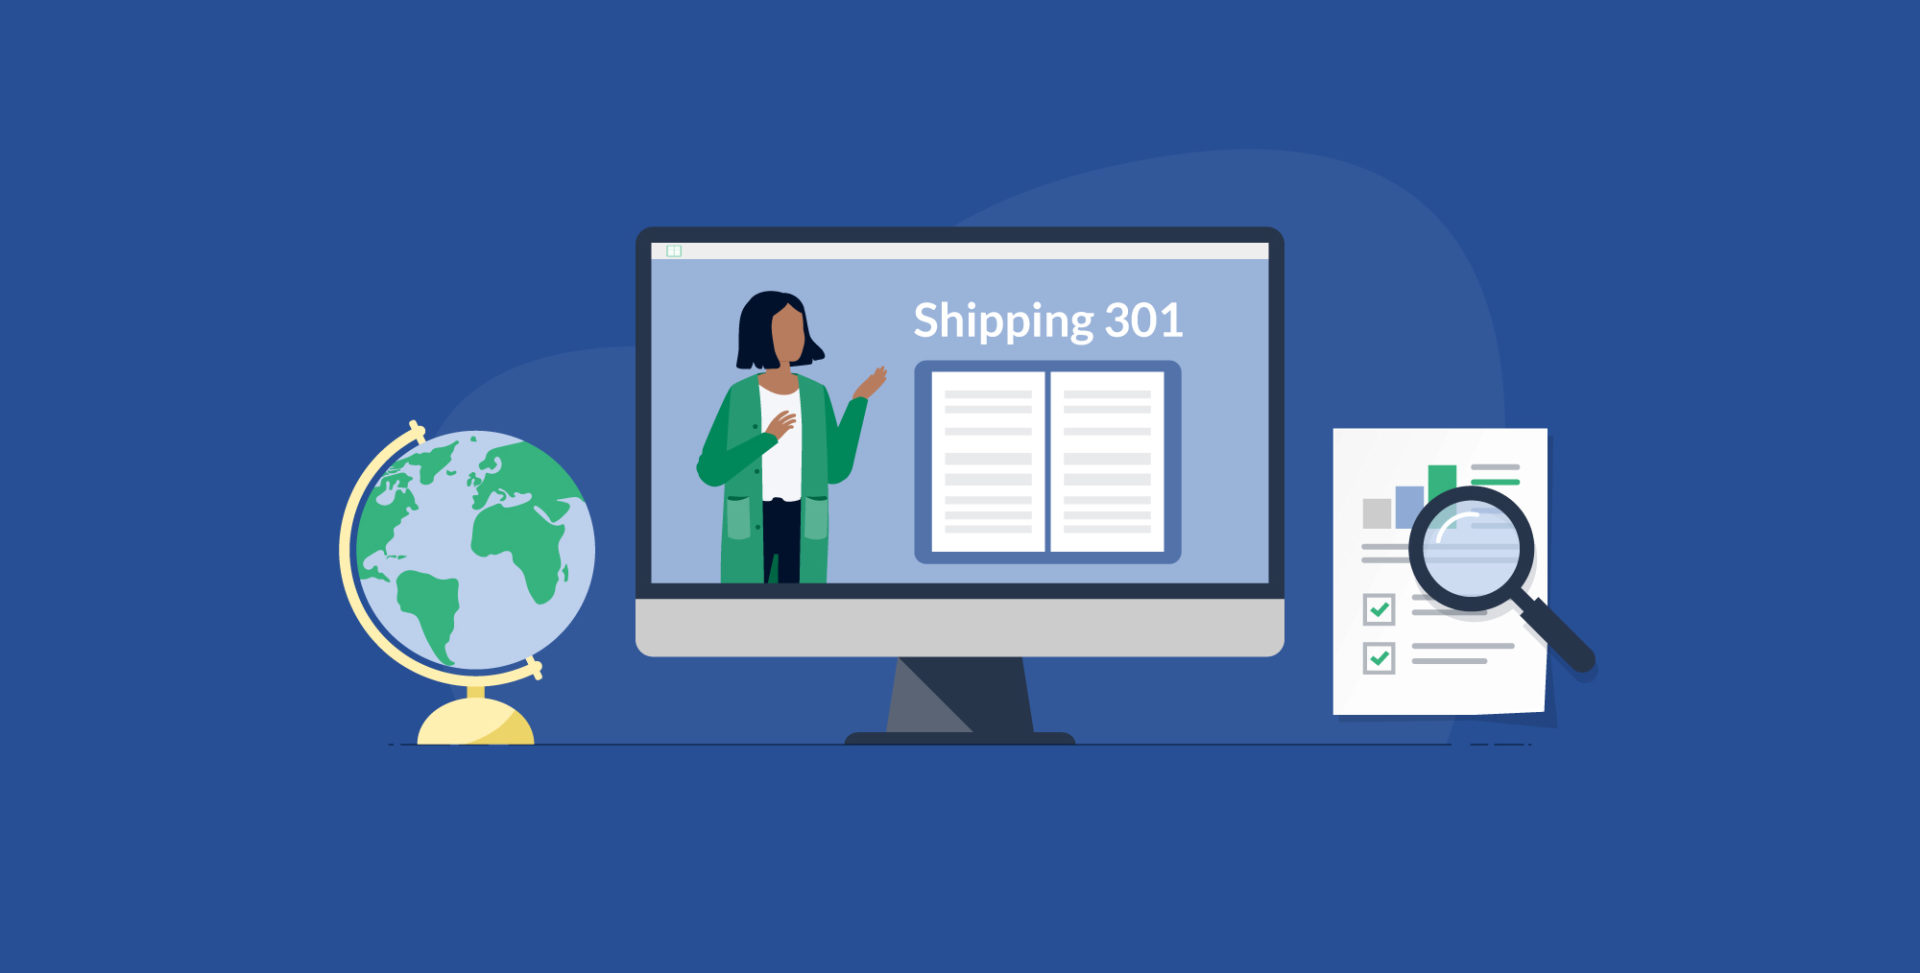 Learn about advanced features, other ShippingEasy plans, and omnichannel selling with the last piece in our shipping education series, Shipping 301!